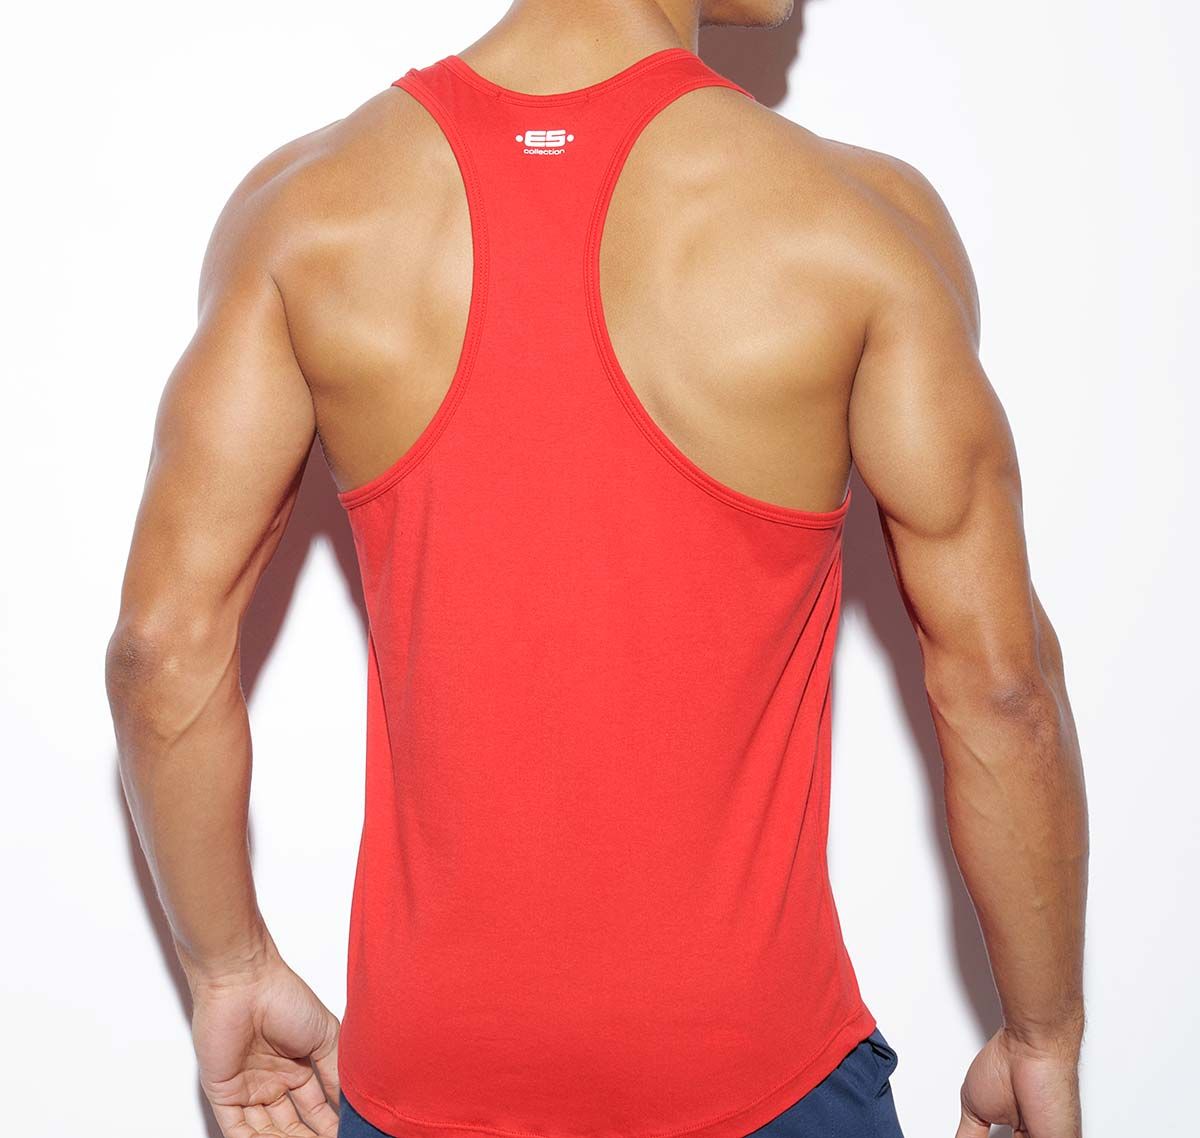 ES Collection NEVER BACK DOWN TANK TOP TS171, rot